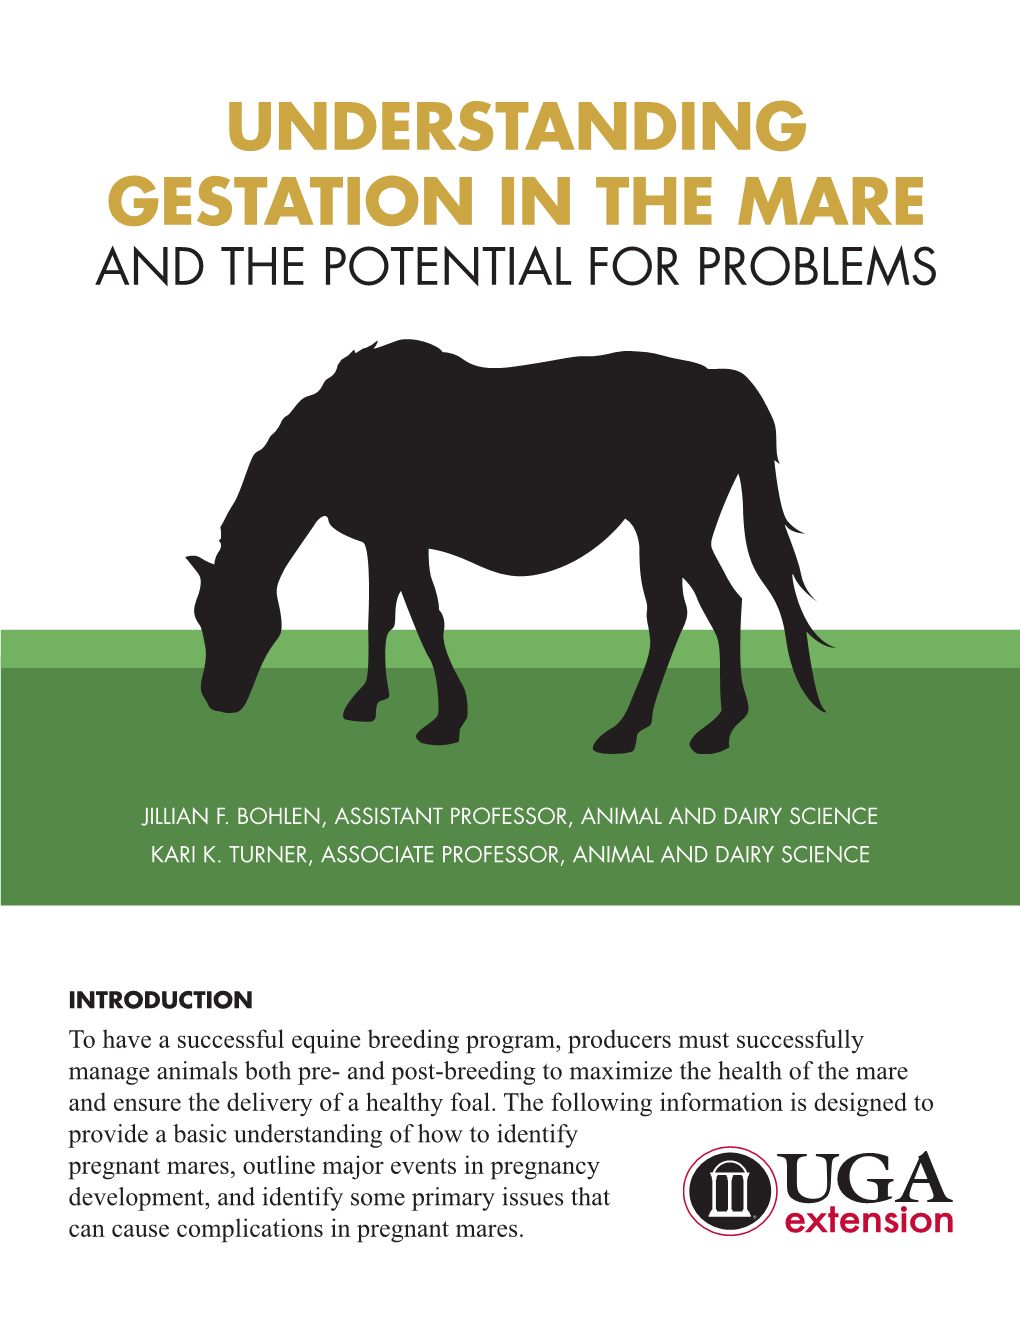 Understanding Gestation in the Mare and the Potential for Problems